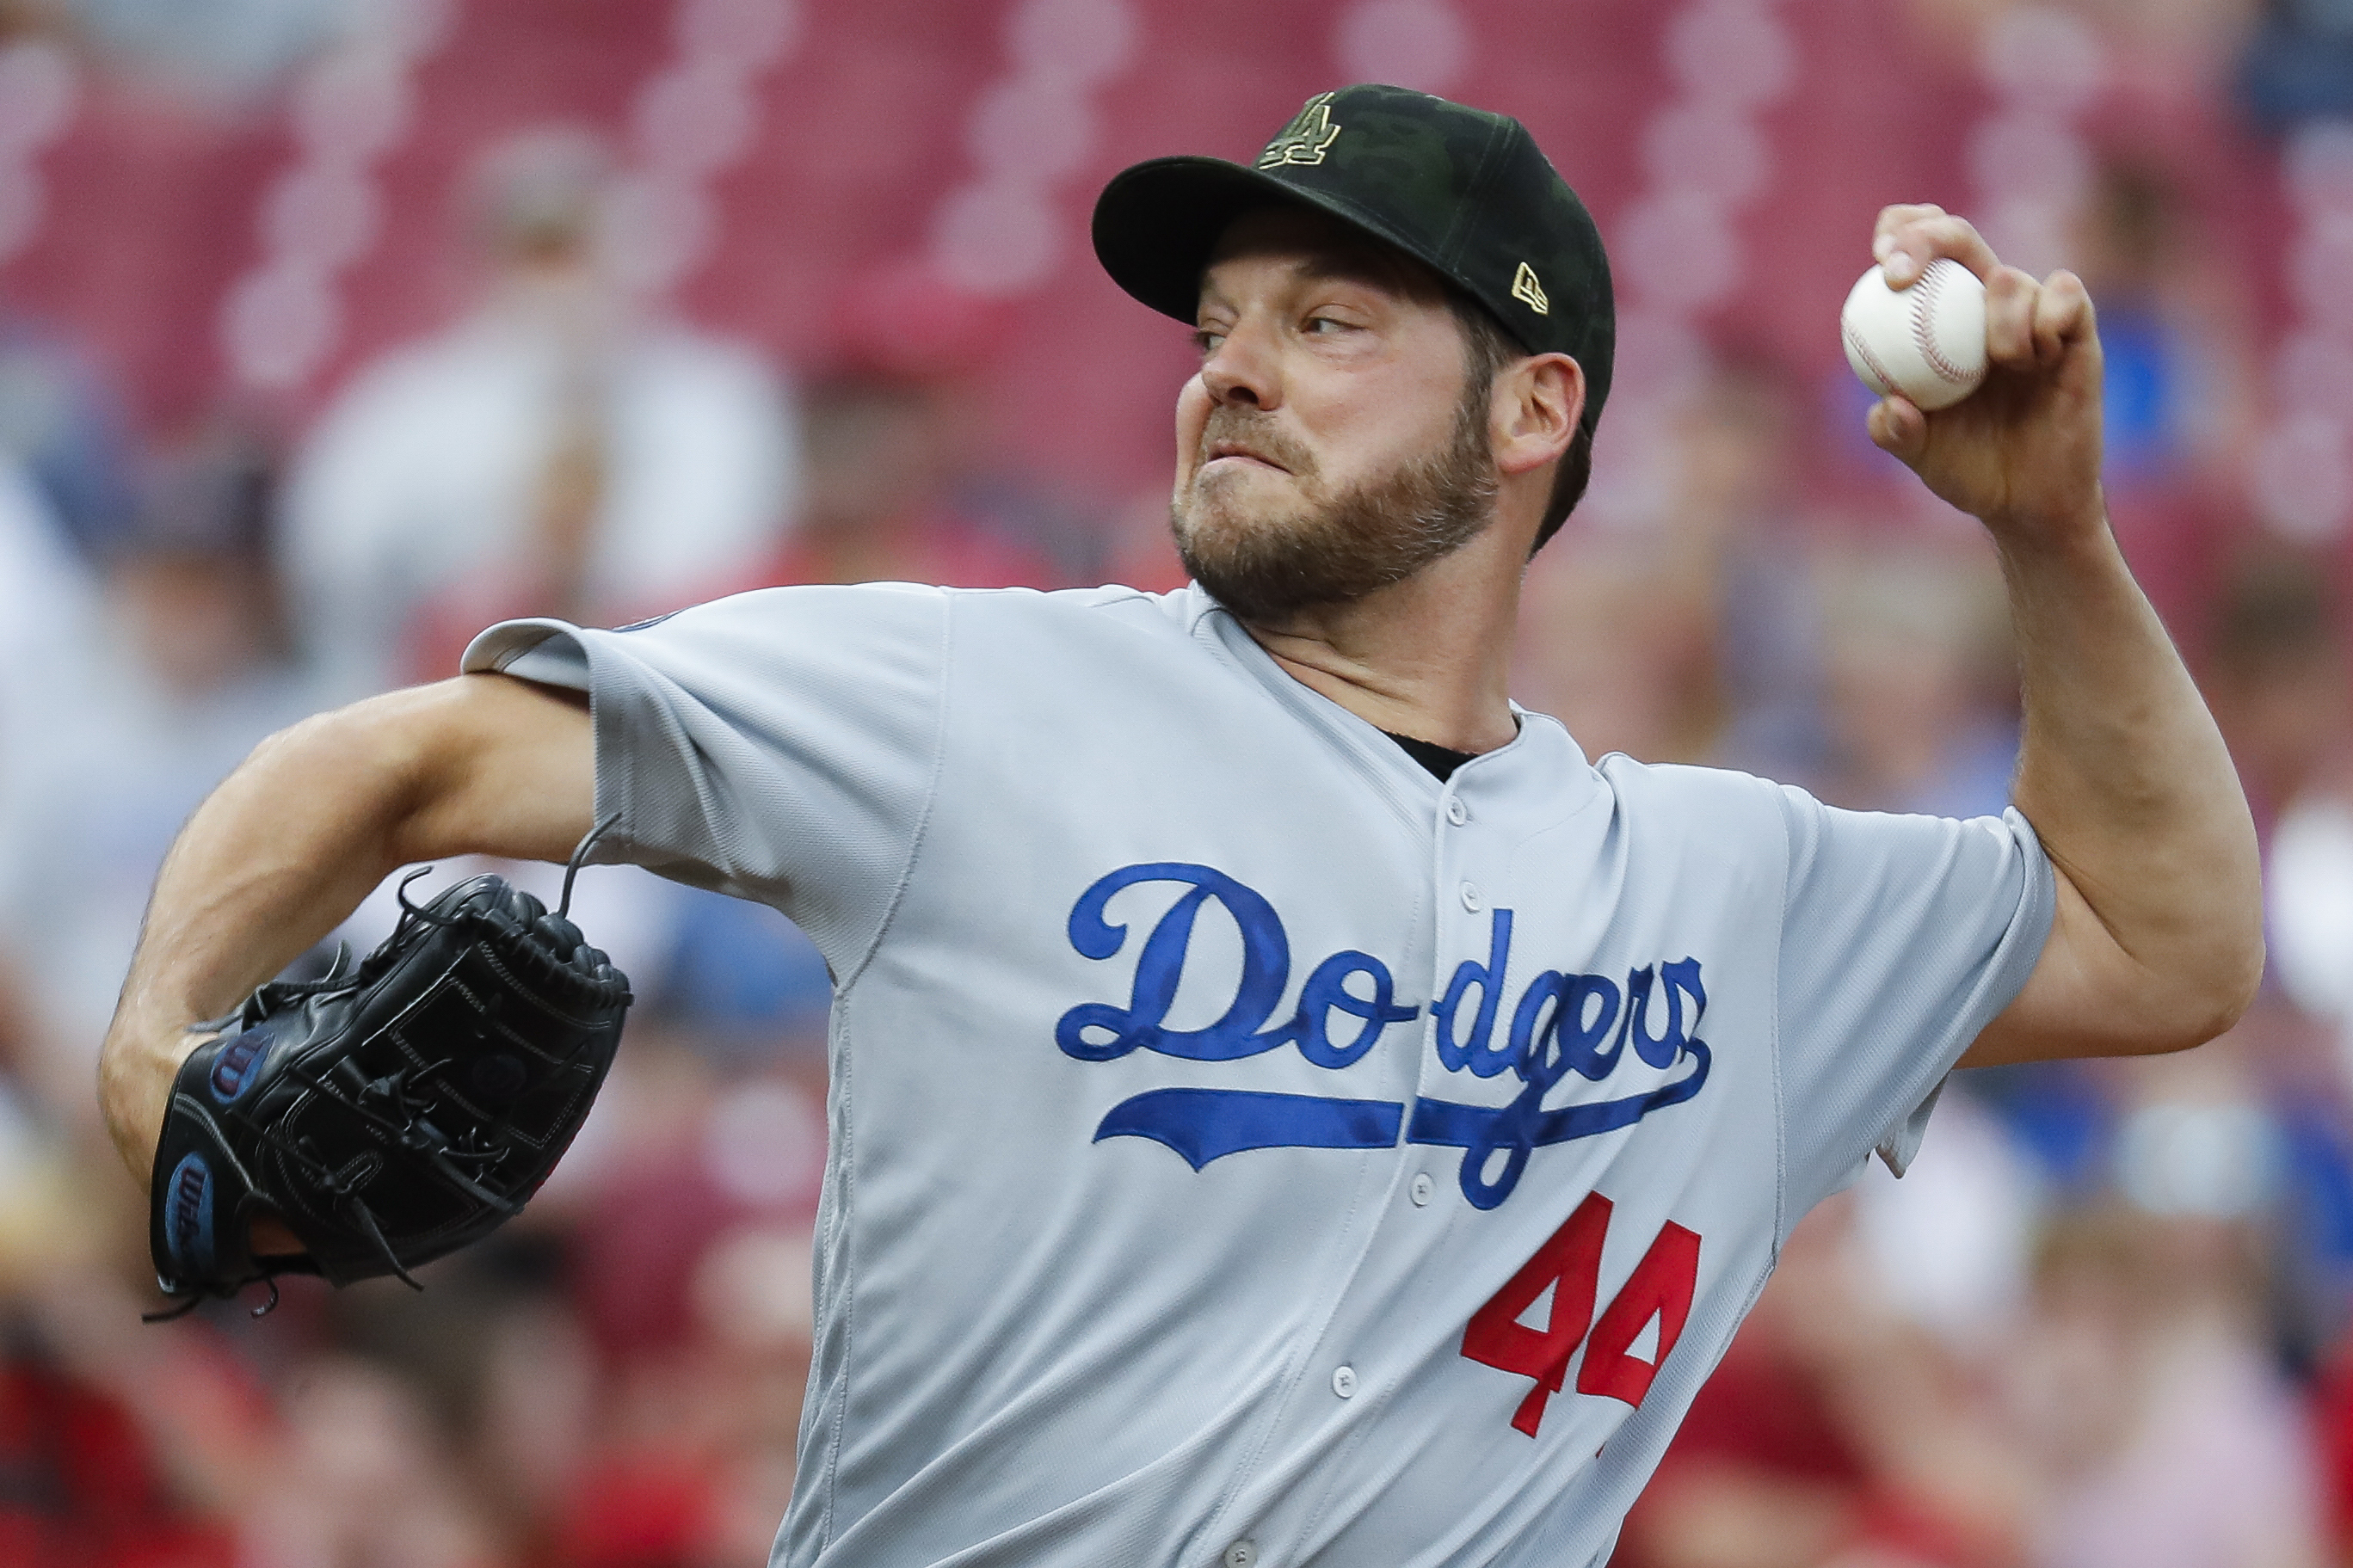 Dodgers hit 4 HRs, beat Reds 6-0 for 4th straight victory